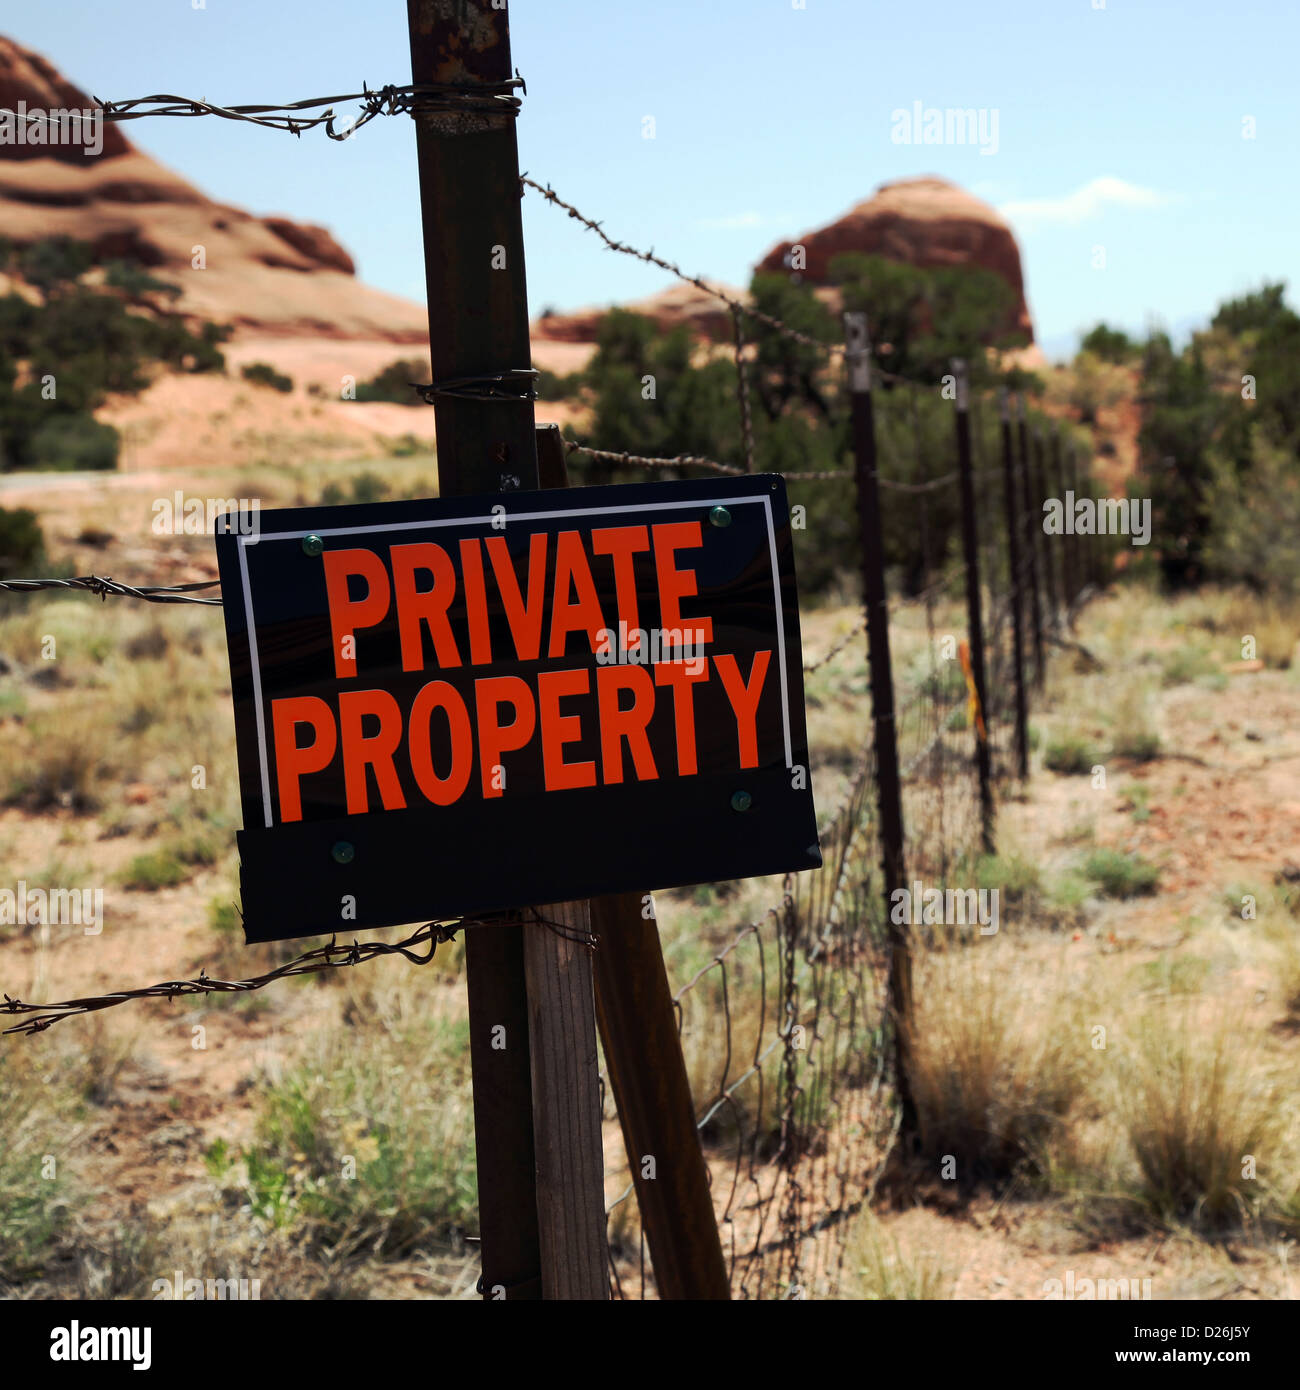 Private property sign on fence Stock Photo